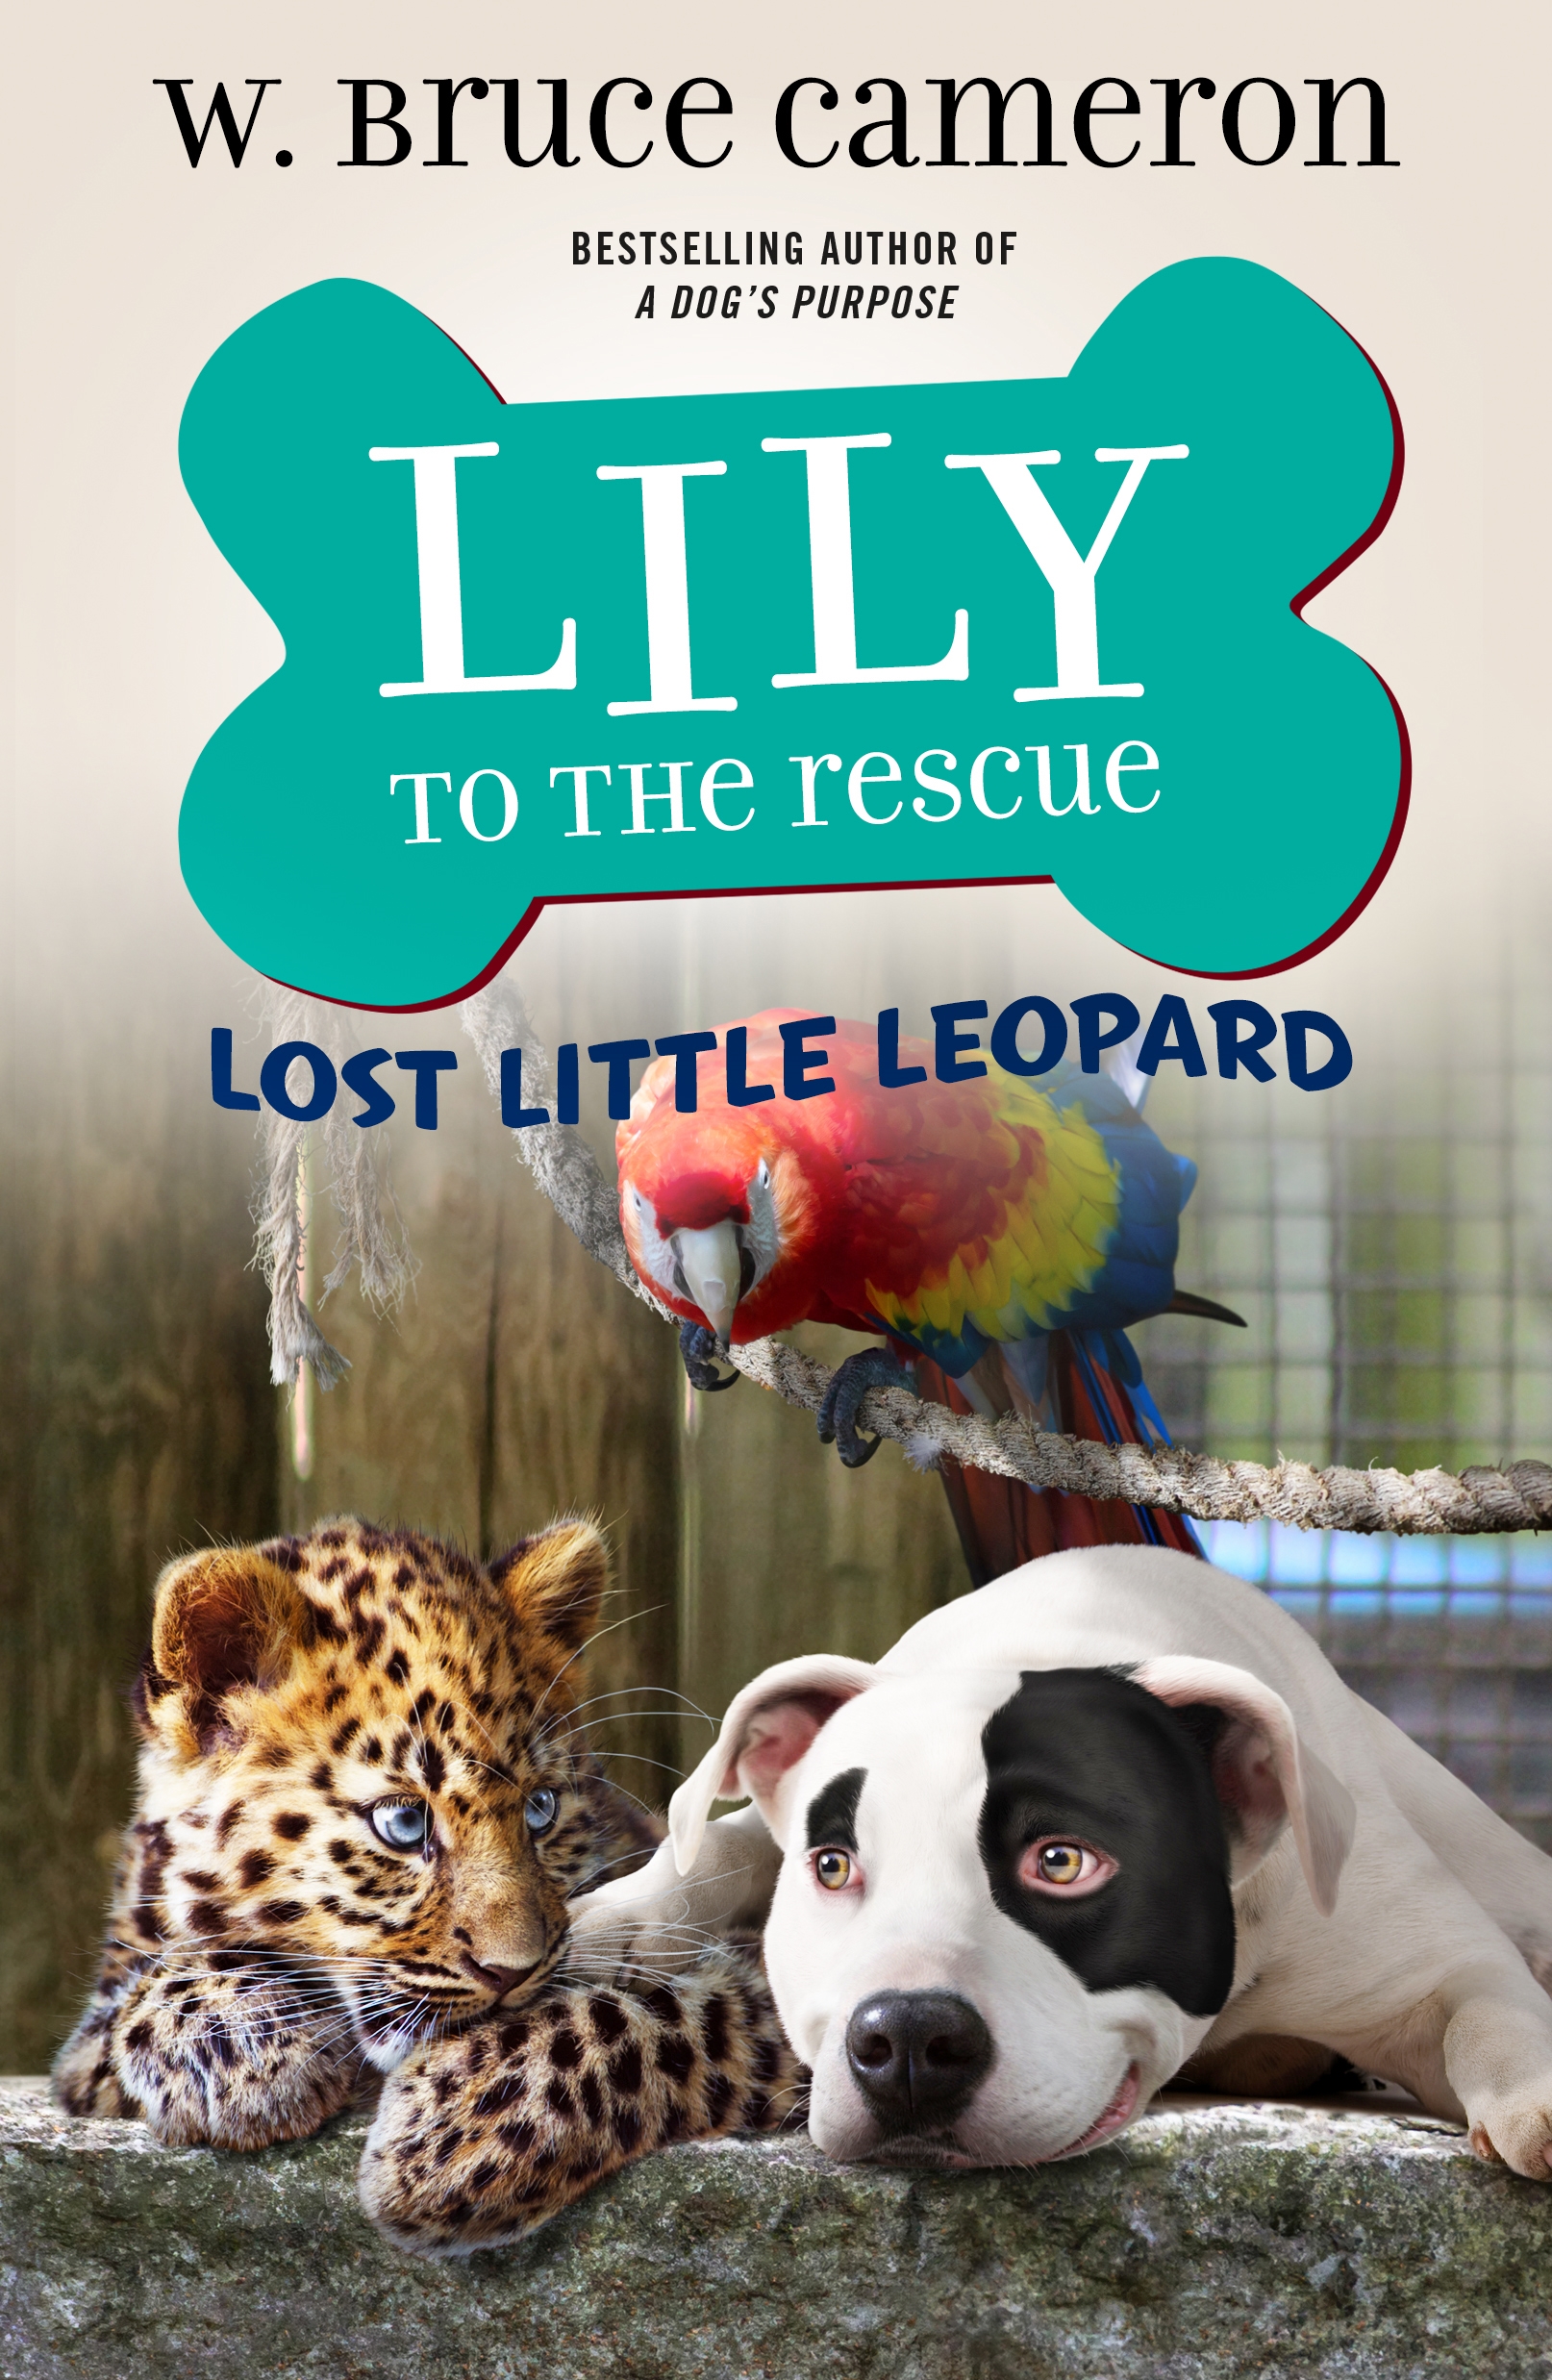 Lily to the Rescue: Lost Little Leopard by W. Bruce Cameron, James Bernardin